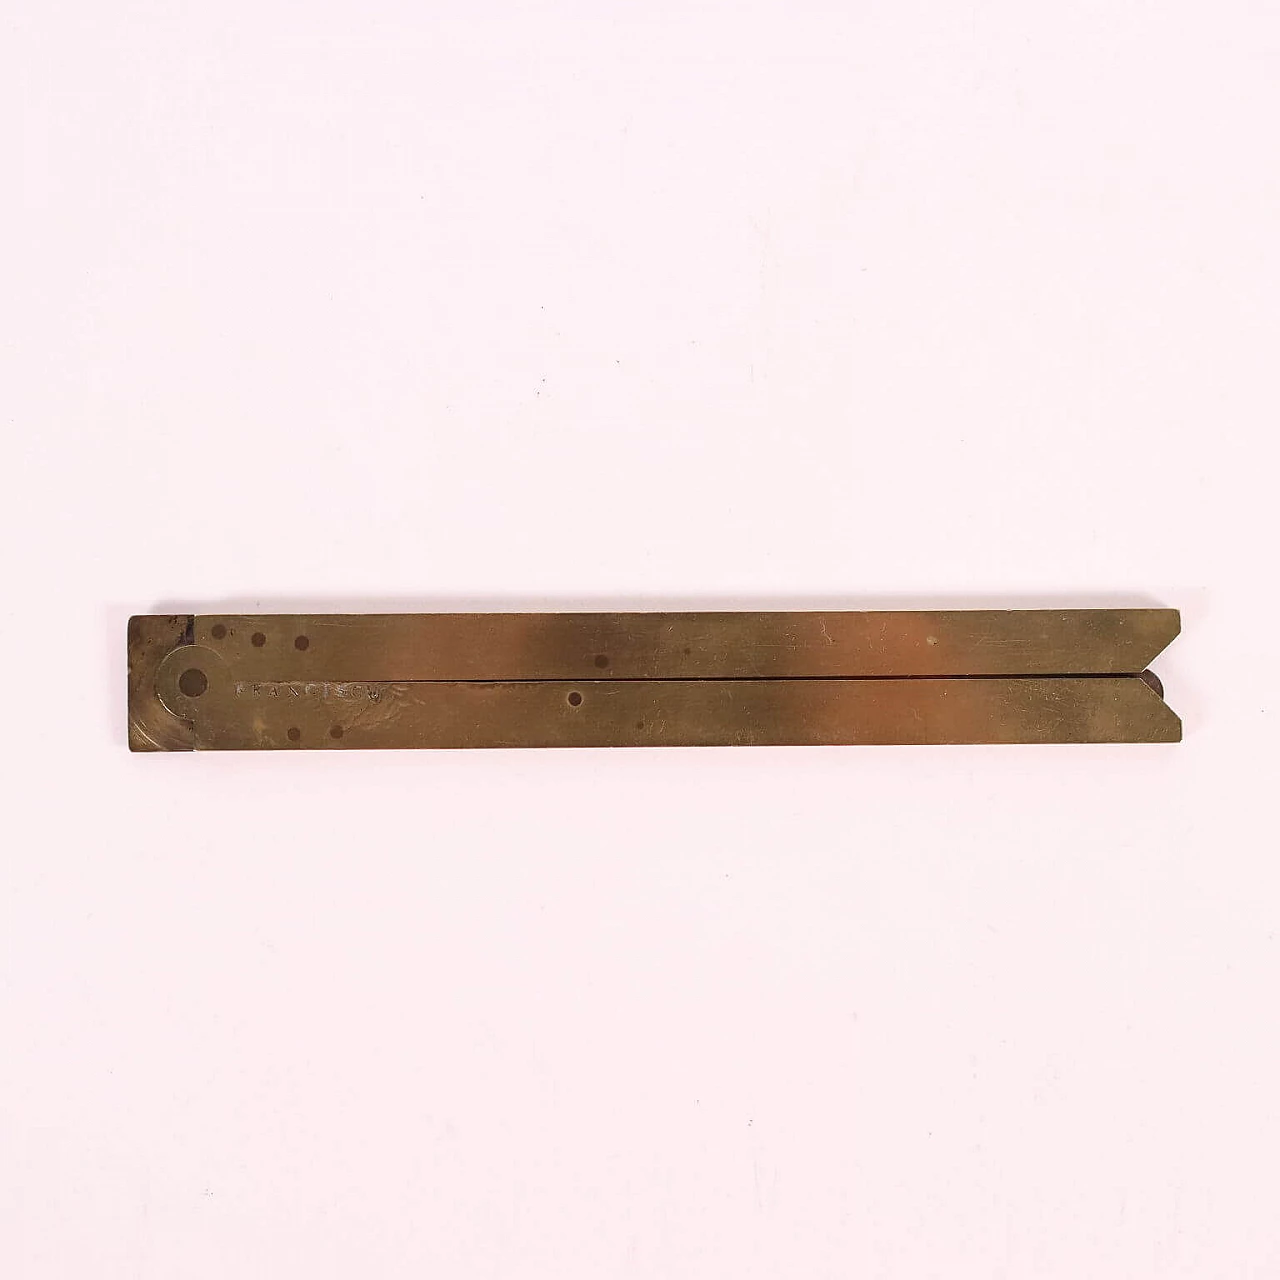 Brass level square by Franciscu, end of 18th century 8